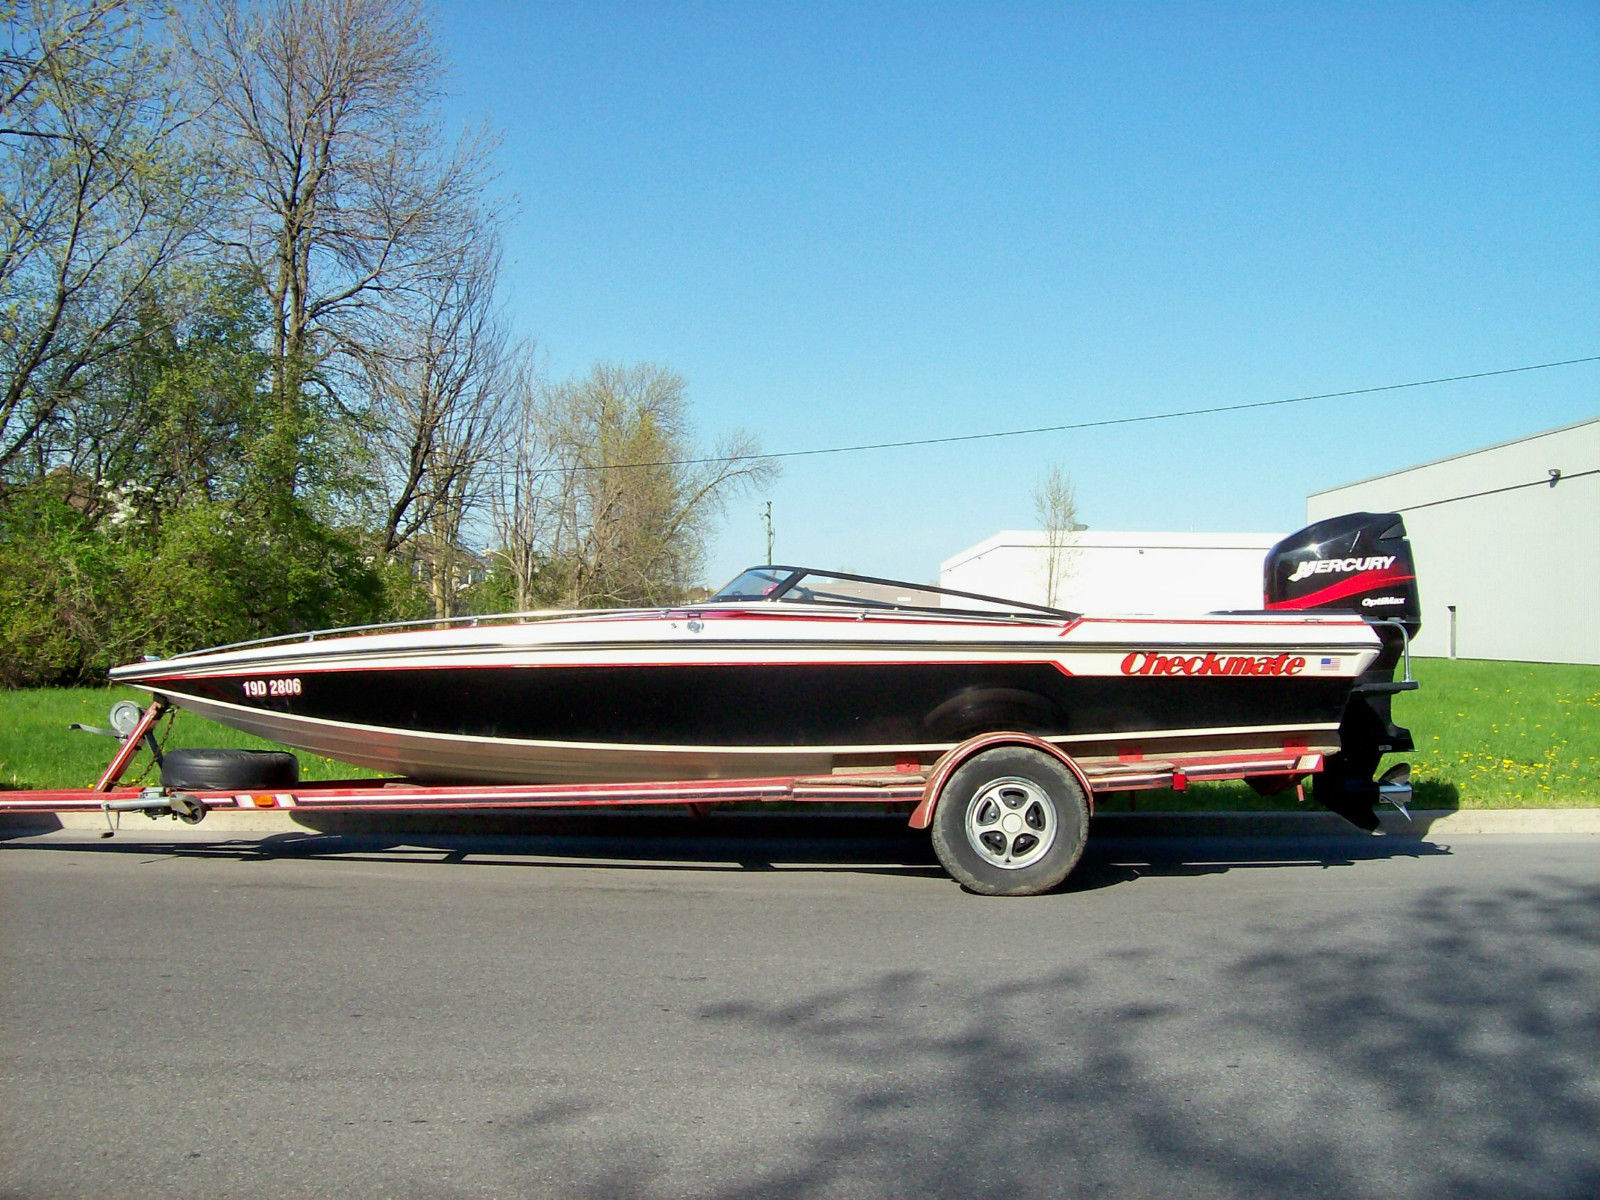 21 foot checkmate boat